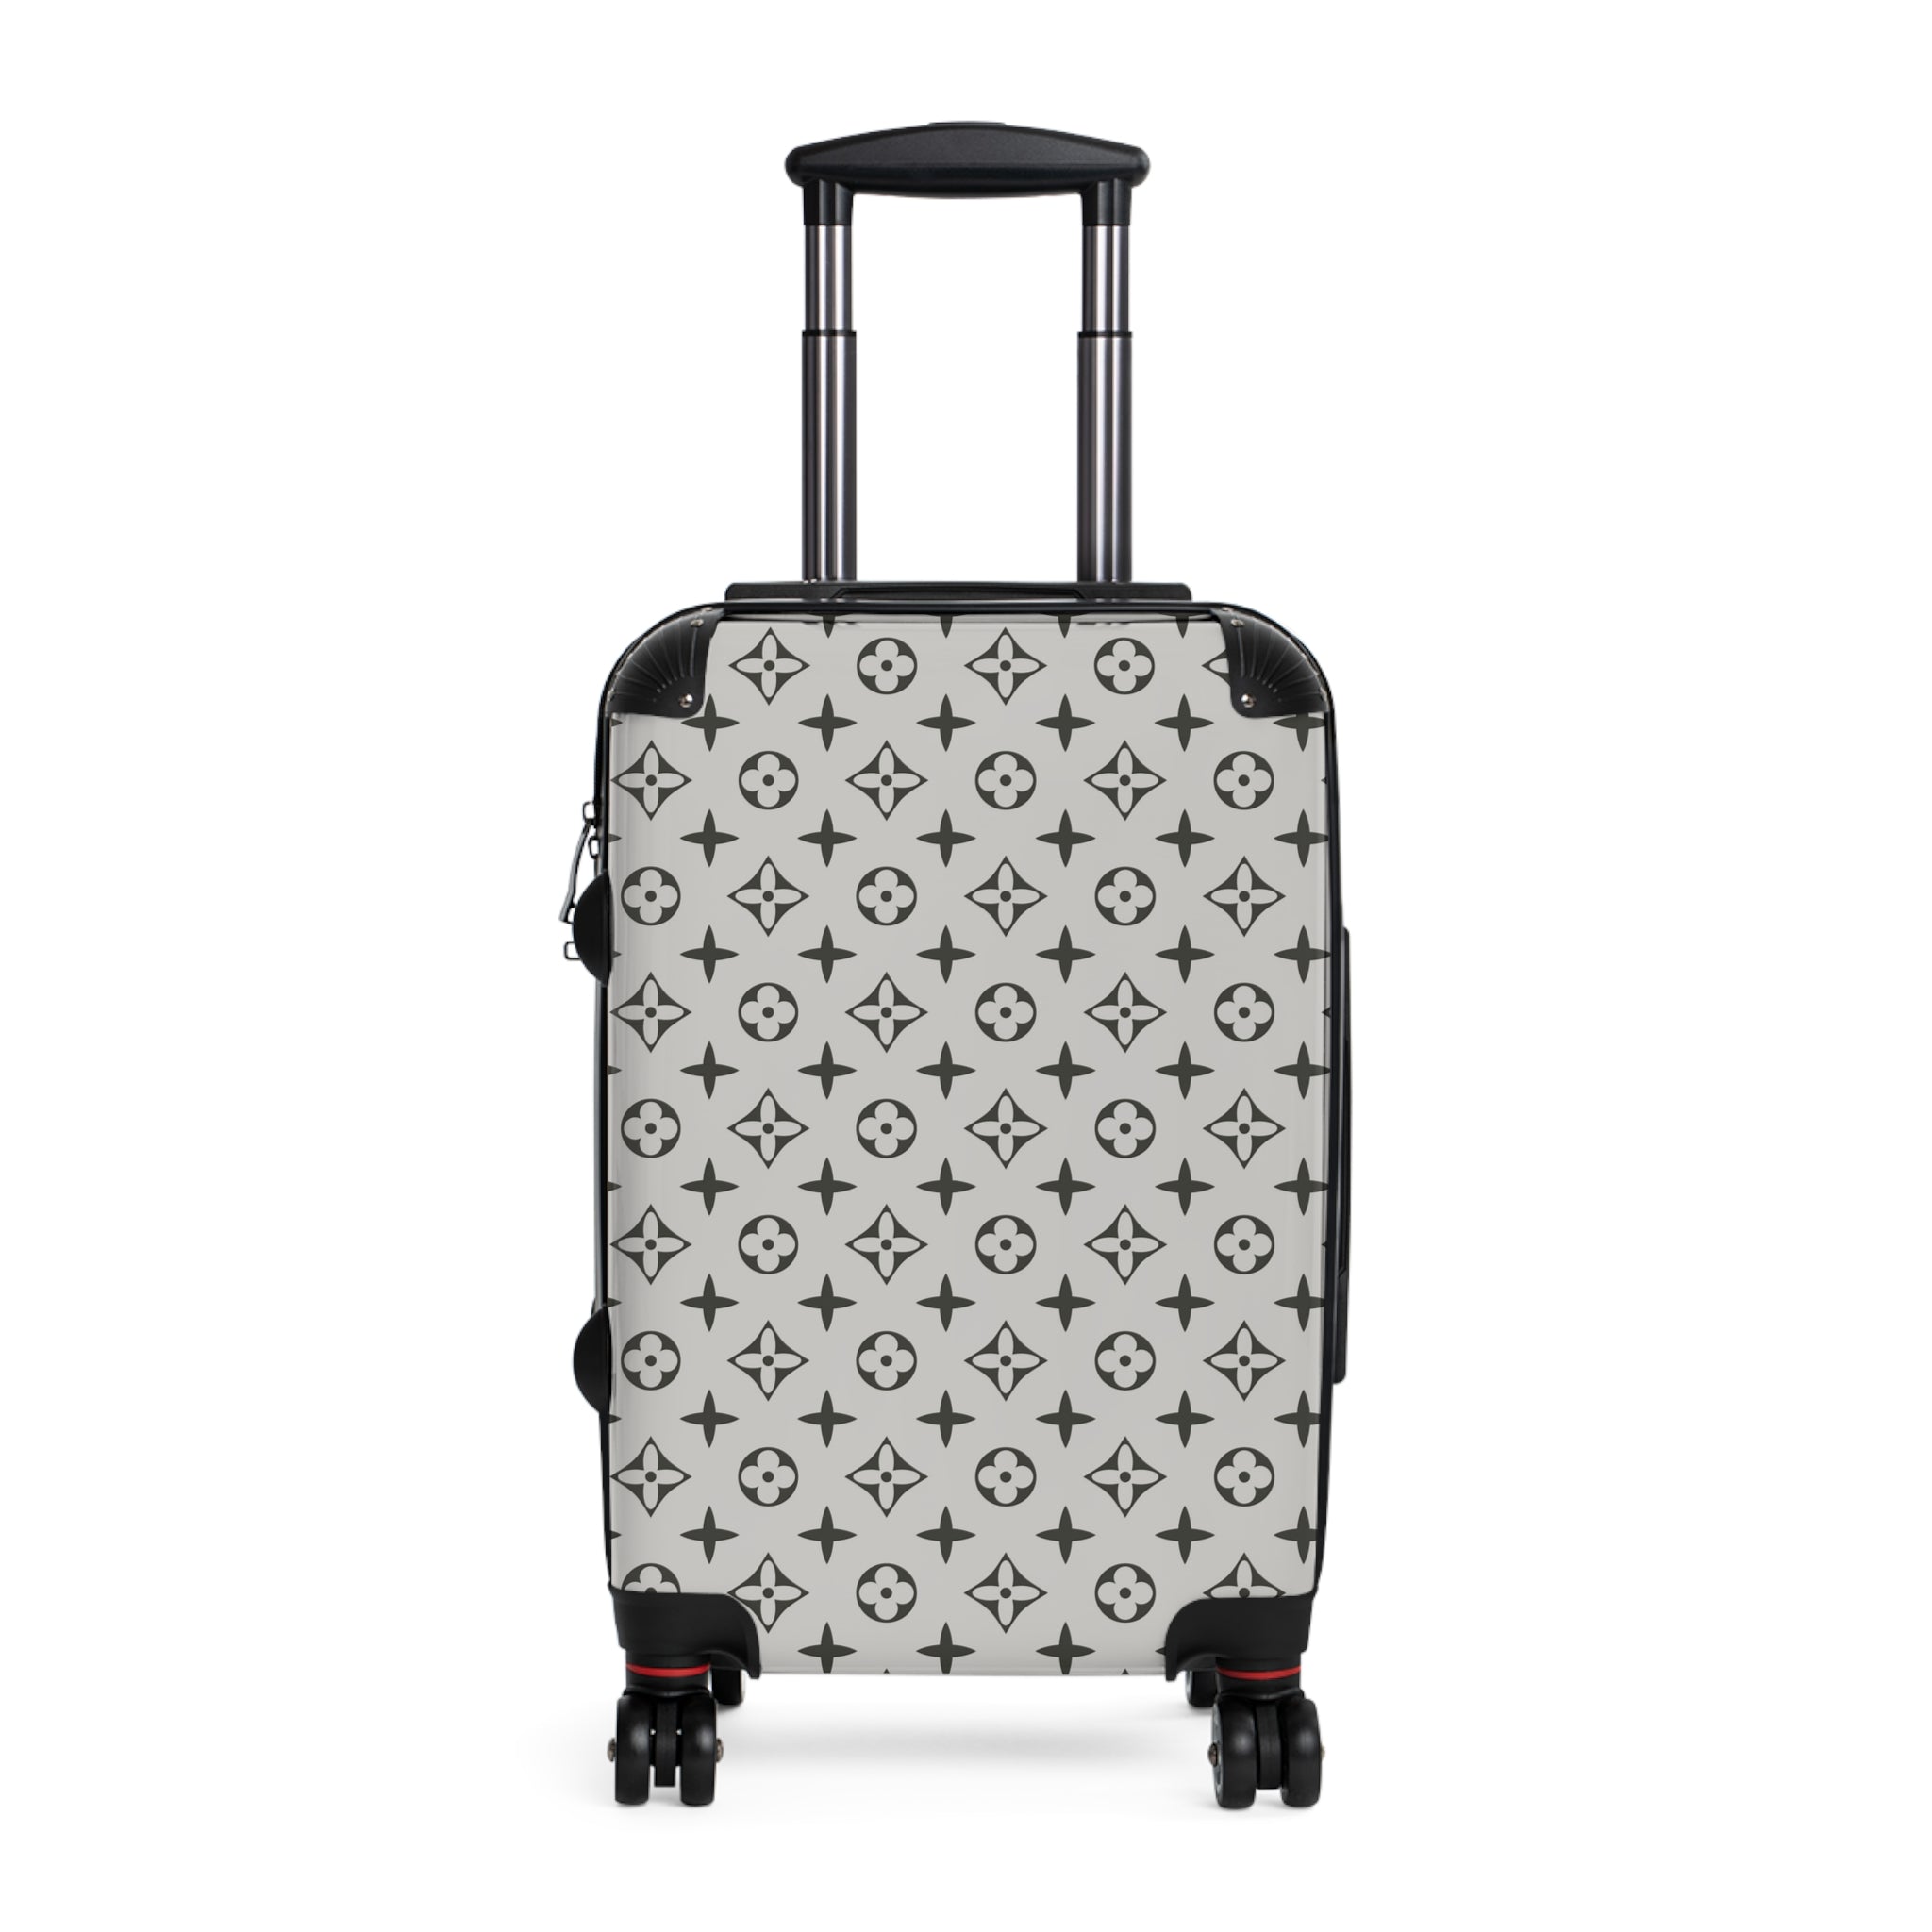 Abby Travel Collection Large Grey Icon Suitcase, Hard Shell Luggage, Rolling Suitcase for Travel, Carry On Bag Bags Small-Black The Middle Aged Groove